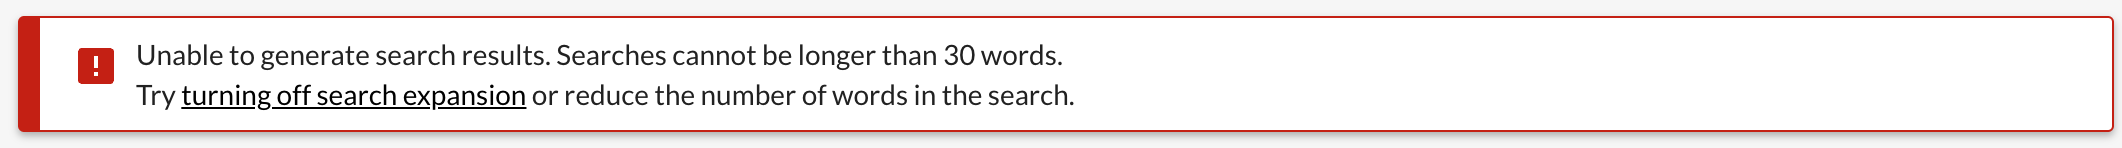 Screenshot of text: "Unable to generate search results. Searches cannot be longer than 30 words. Try turning off search expansion or reduce the number of words in the search."